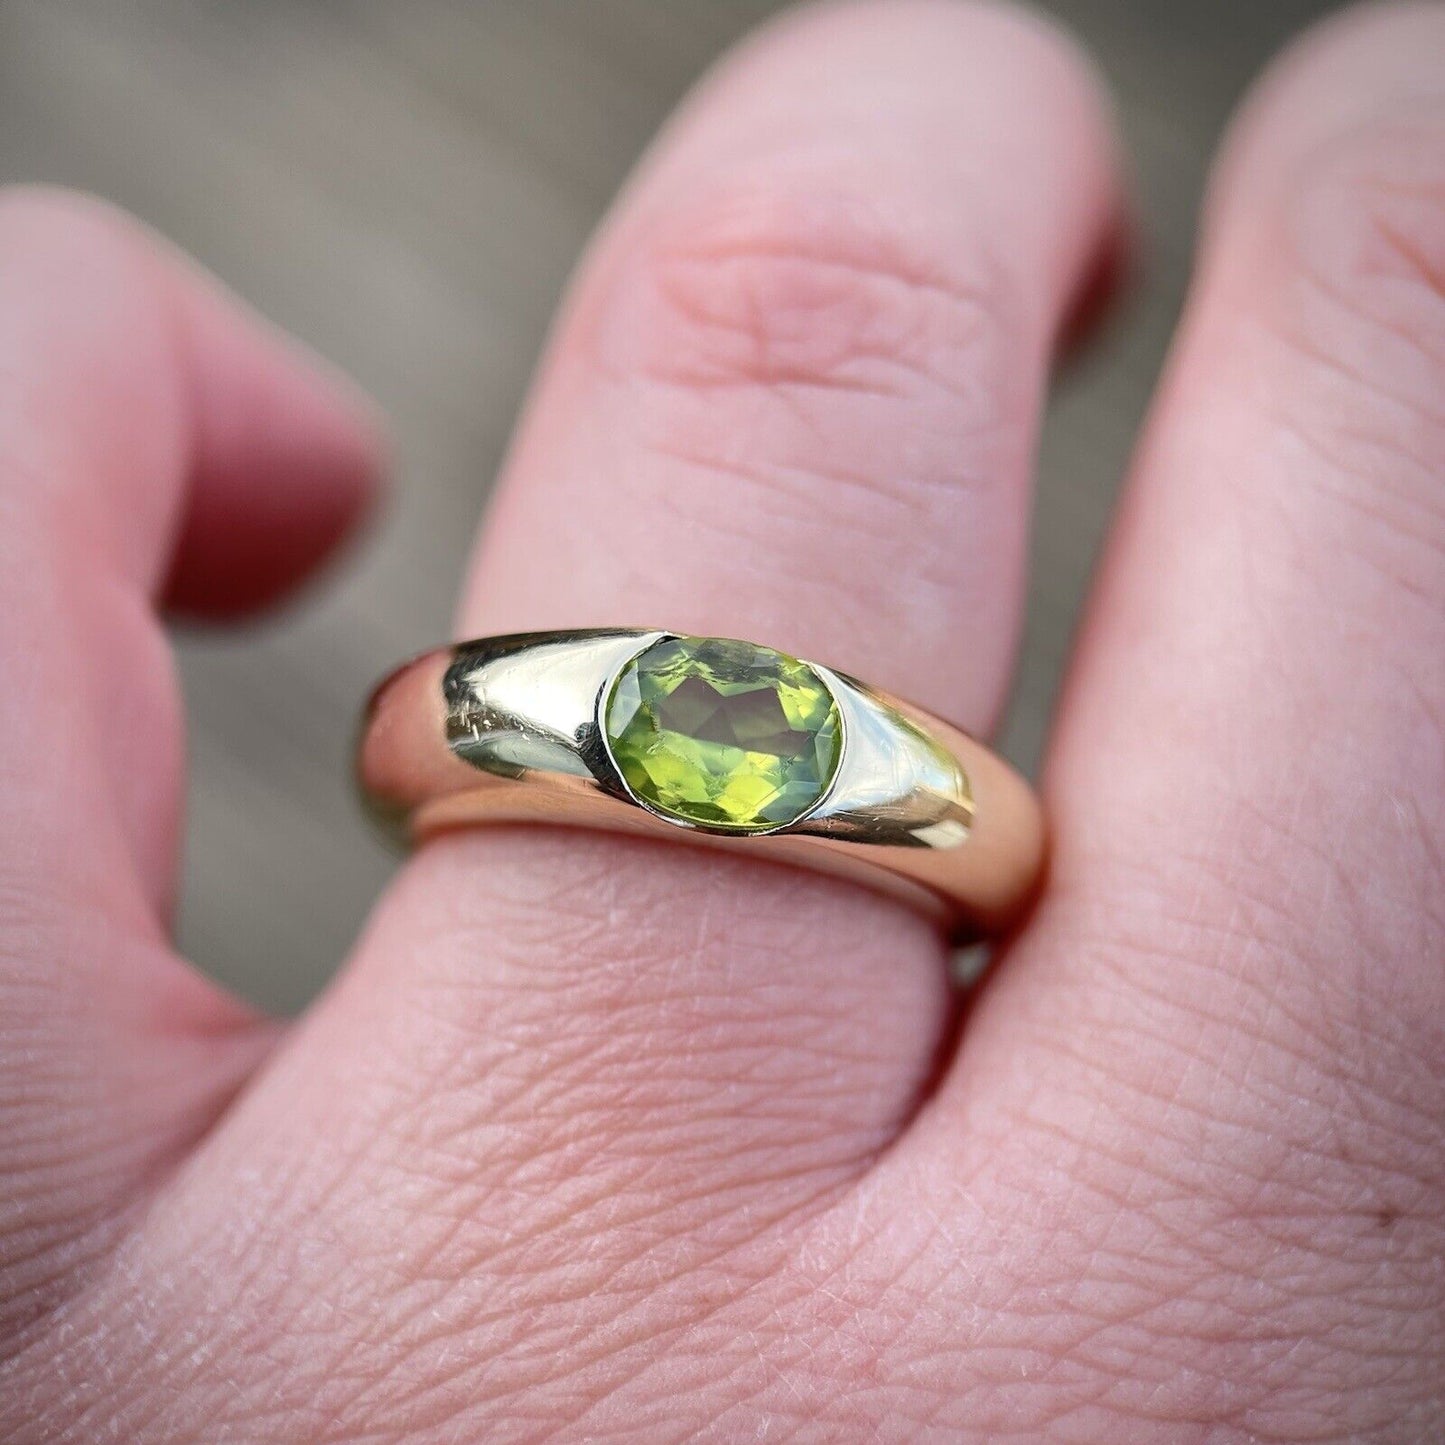 Peridot Solitaire Signet Gypsy Ring Size M 1/2 10 grams 14ct Yellow Gold HEAVY!